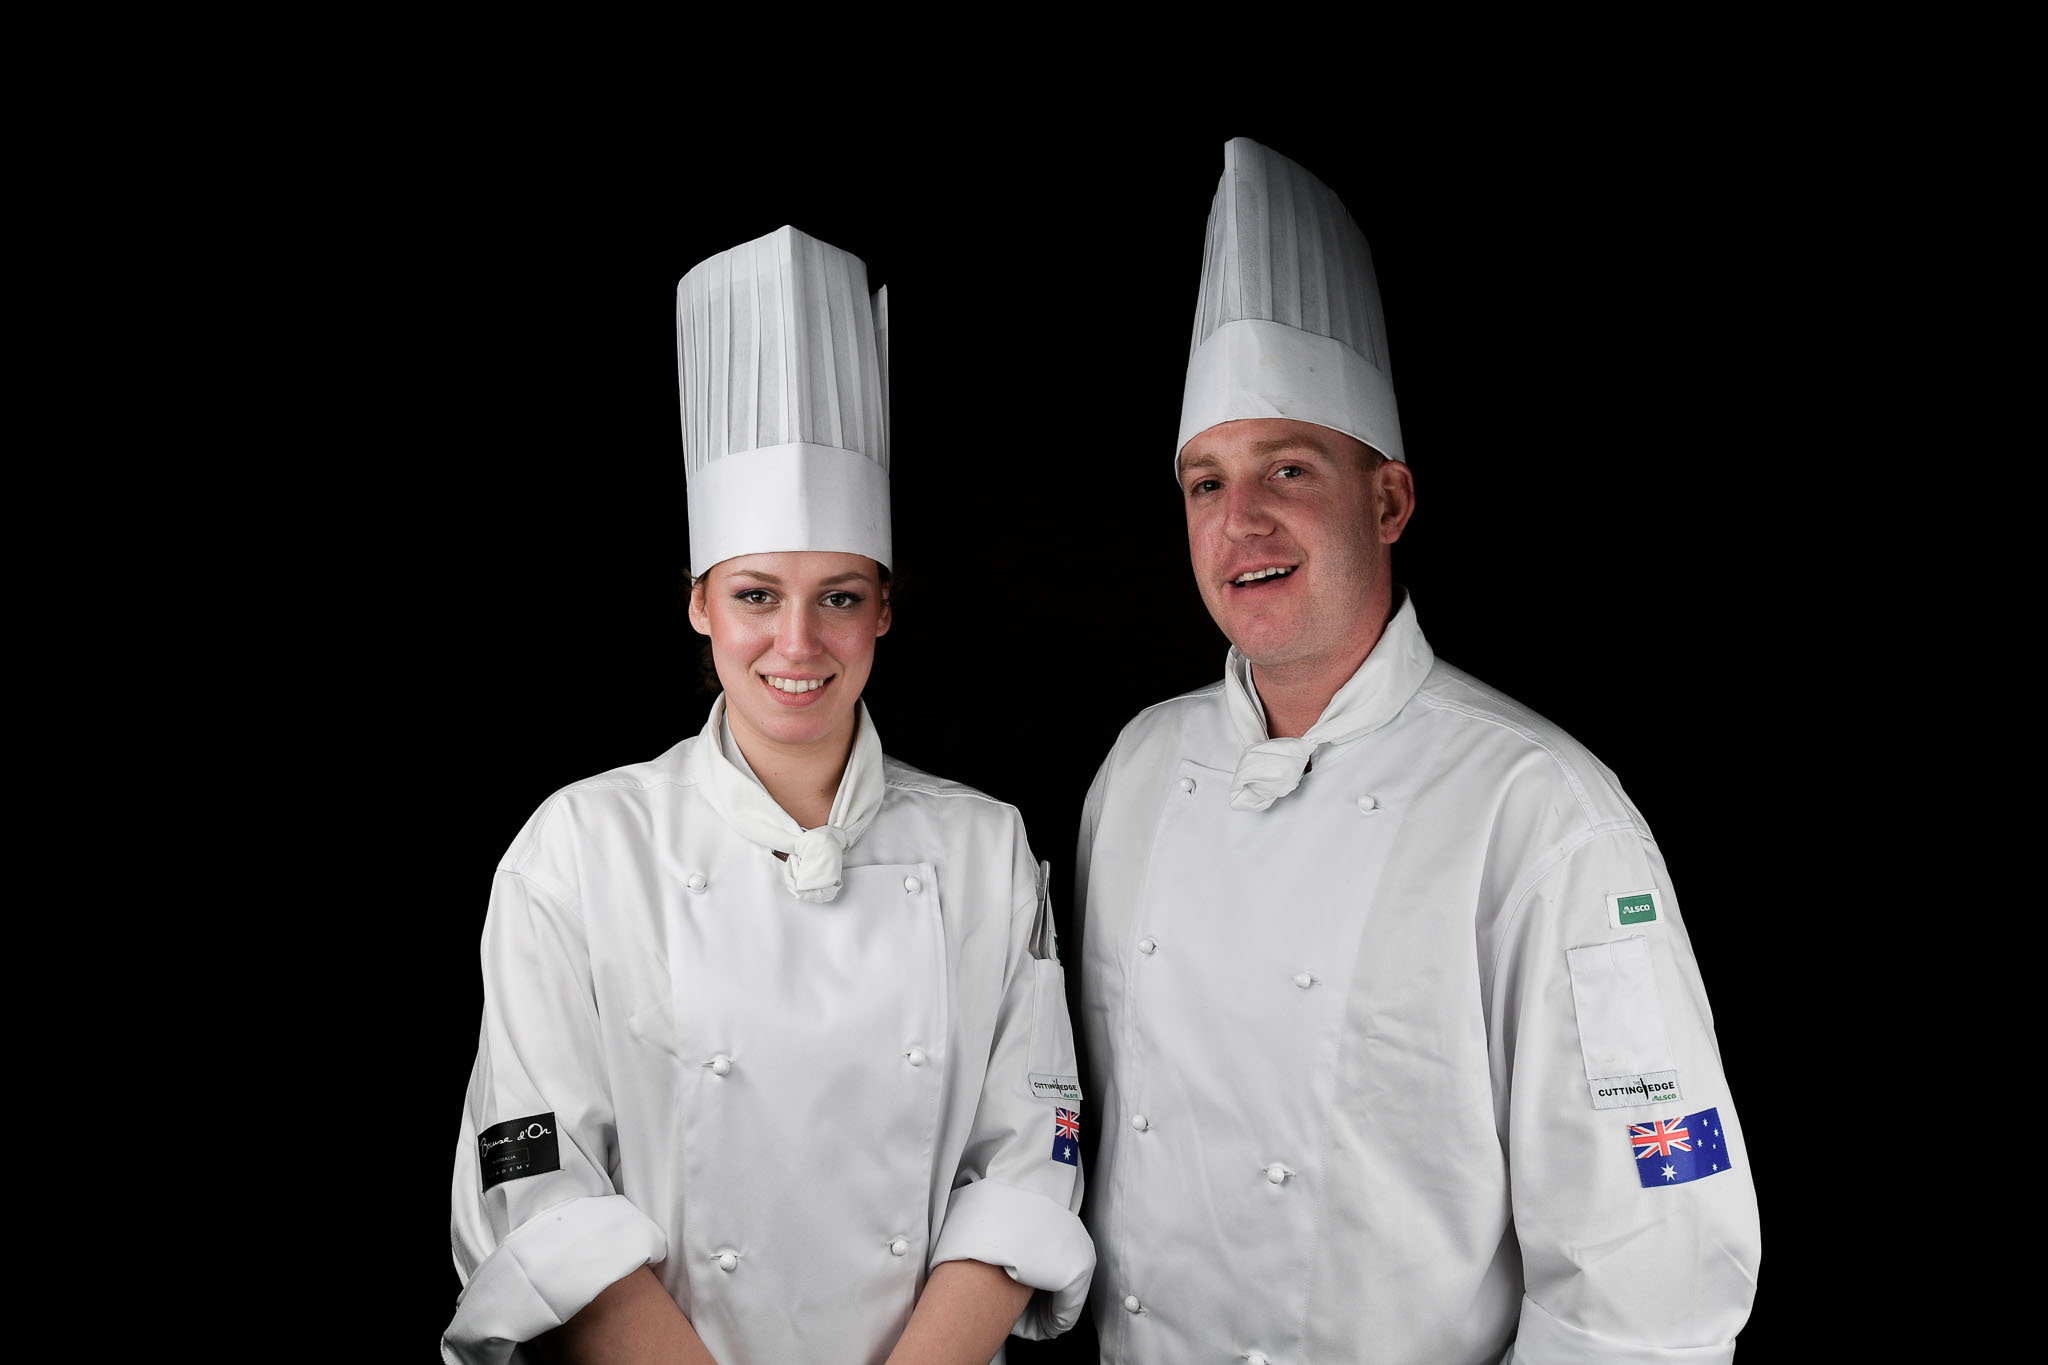 Melbourne, 30 May 2017 - Laura Skvor commis chef and Michael Cole of the Georgie Bass Café & Cookery in Flinders pose for a photograph at the Australian selection trials of the Bocuse d'Or culinary competition held during the Food Service Australia show at the Royal Exhibition Building in Melbourne, Australia. Photo Sydney Low